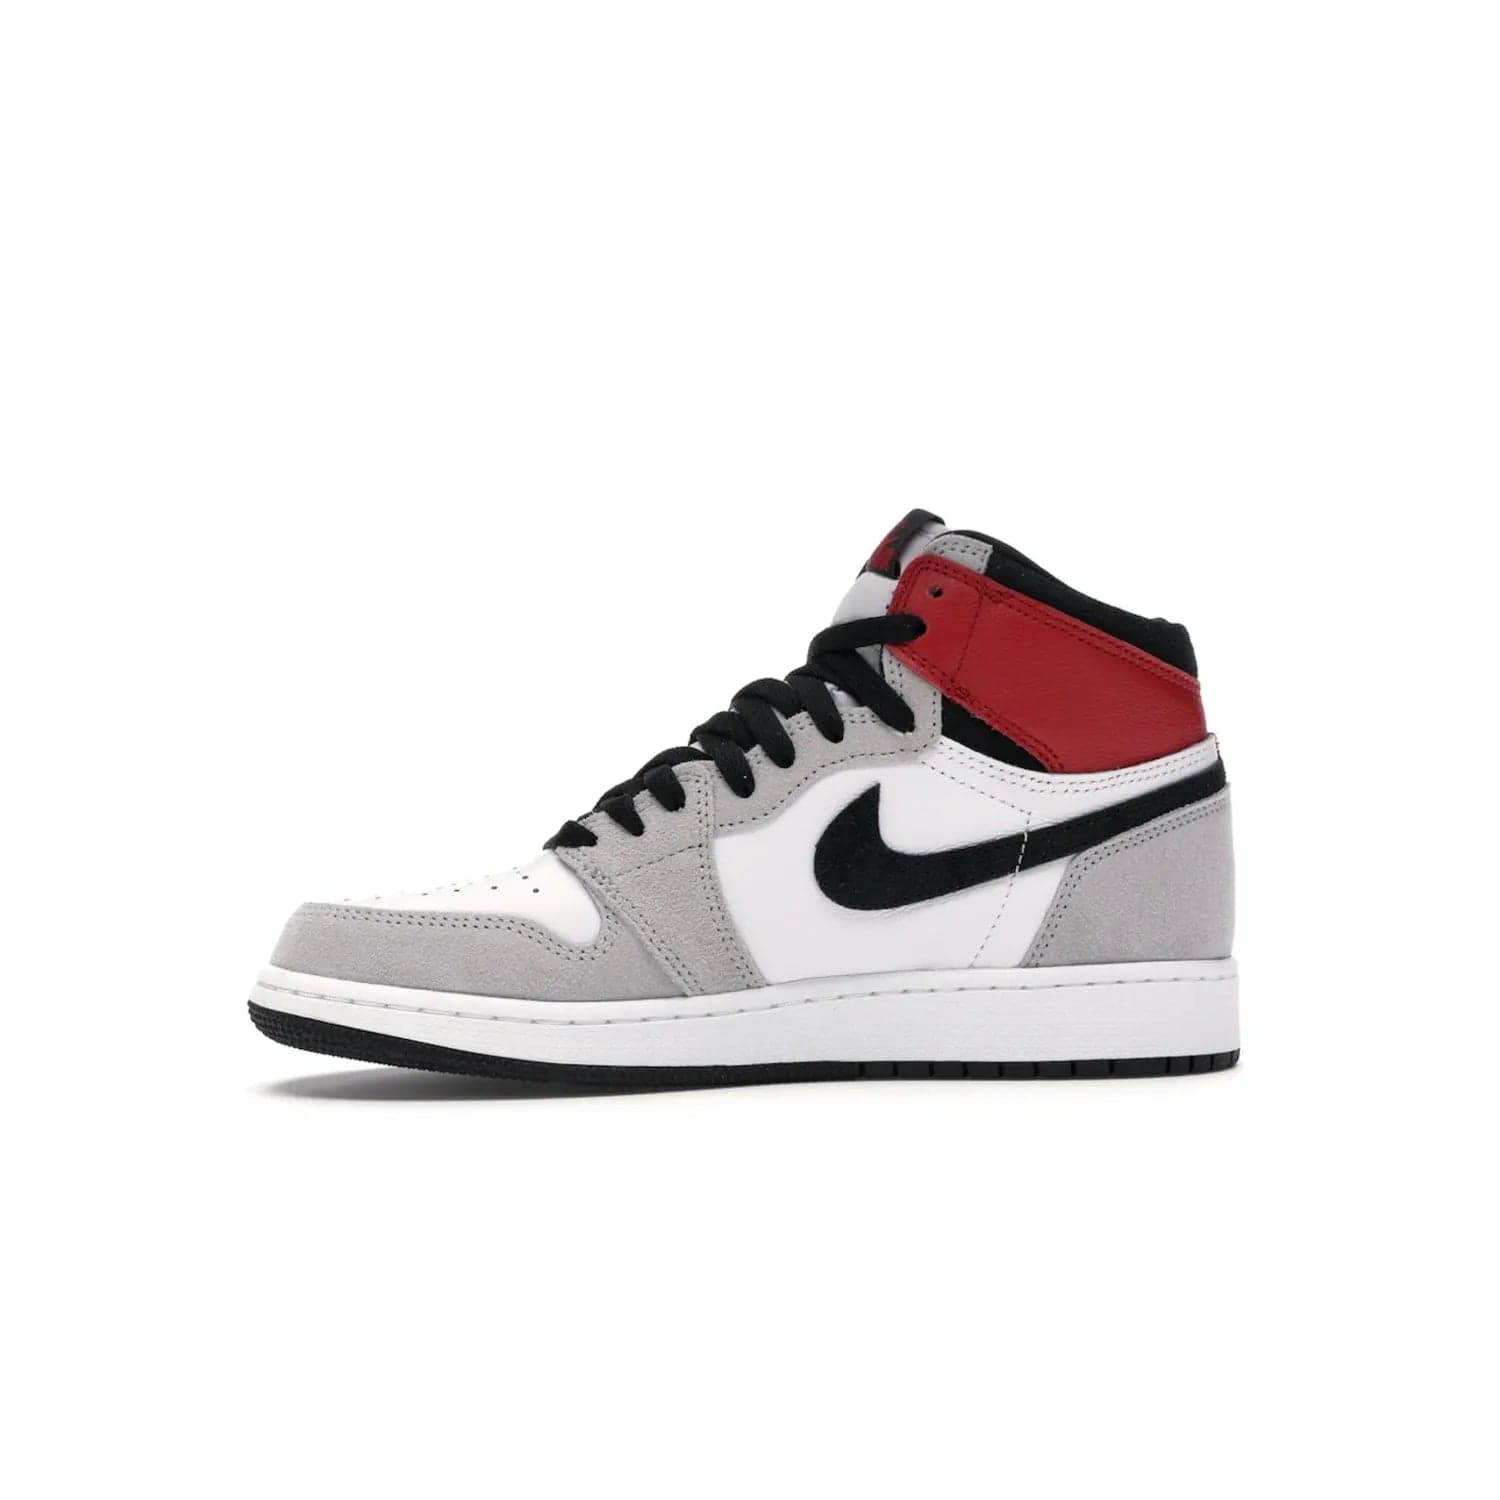 Jordan 1 Retro High Light Smoke Grey (GS) - Image 18 - Only at www.BallersClubKickz.com - Jordan 1 Retro High Light Smoke Grey (GS) features shades of grey, black, and Varsity Red with a bold silhouette. Premium white leather and suede overlays create a unique look. Released July 2020, offering style and performance. Perfect sneaker for any collector or fan.